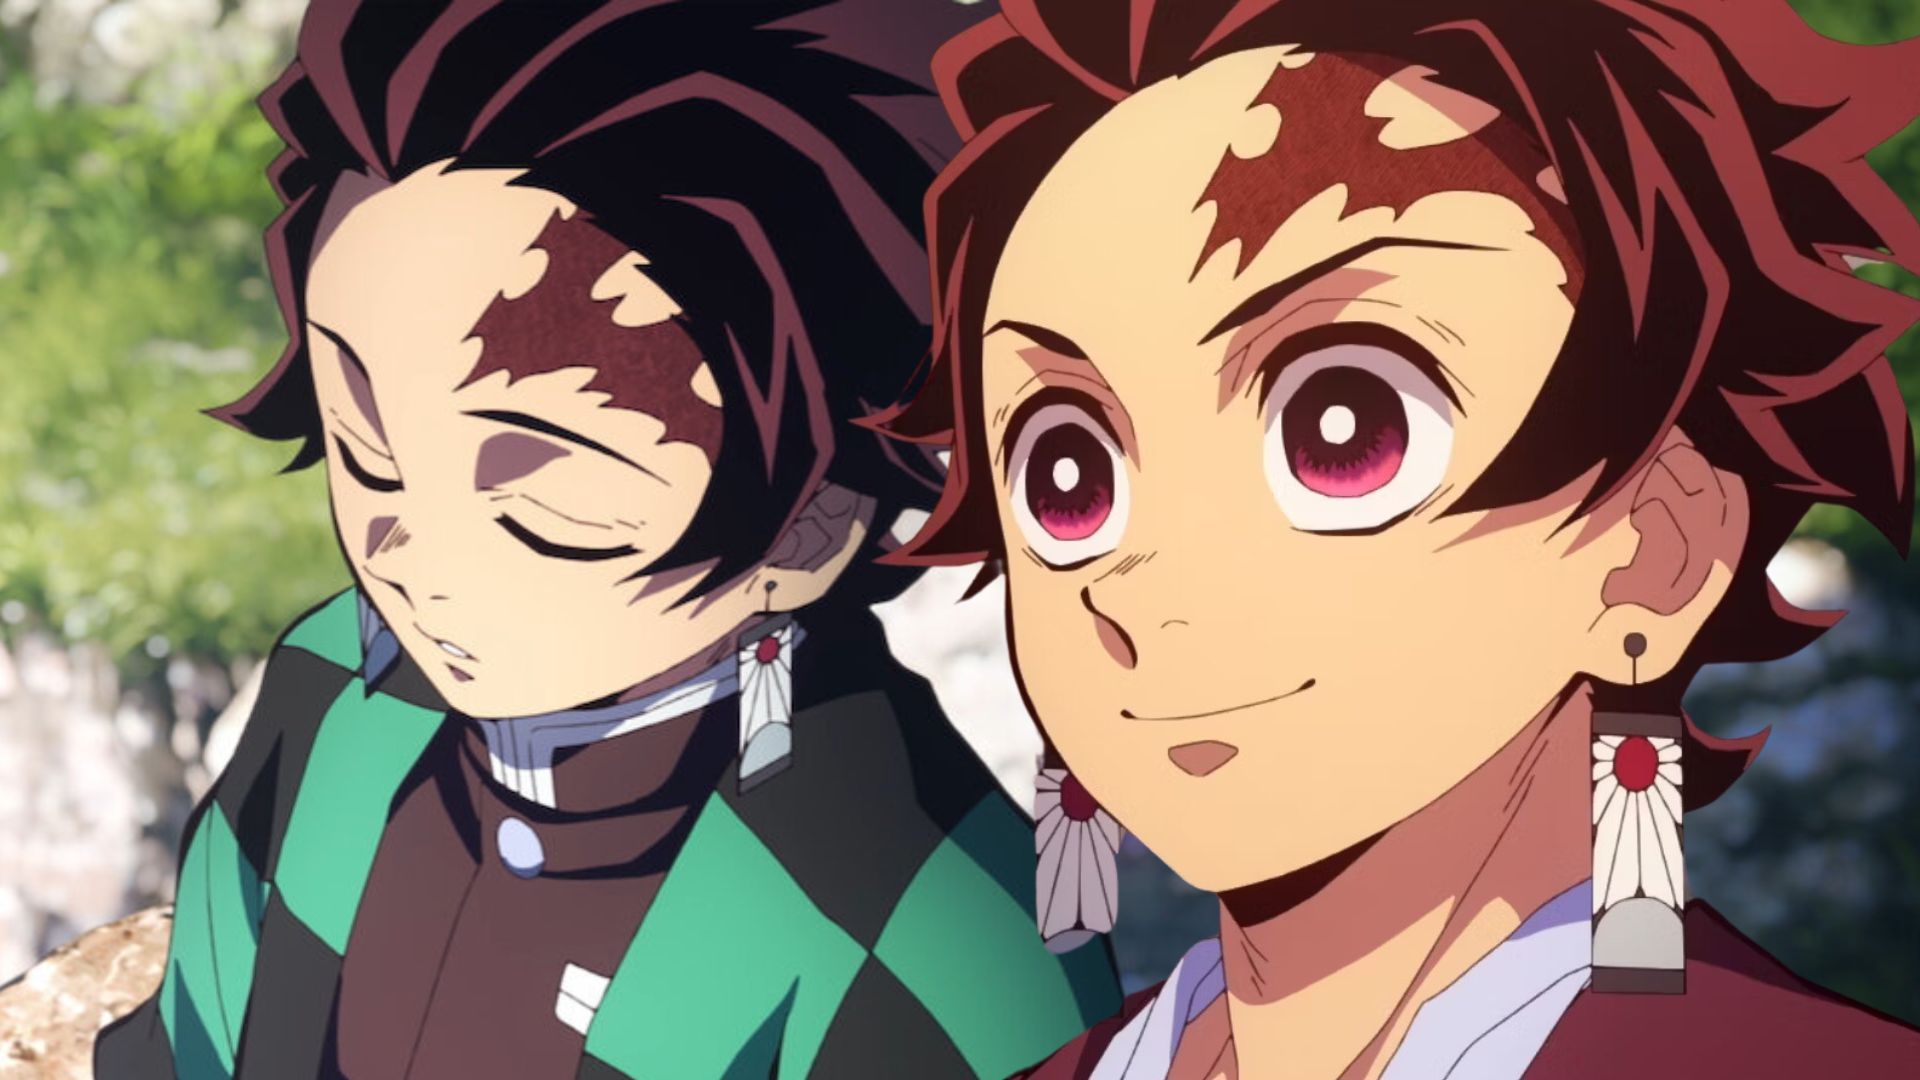 Tanjiro in the background is meditating with cropped image of Tanjiro smiling in the front.